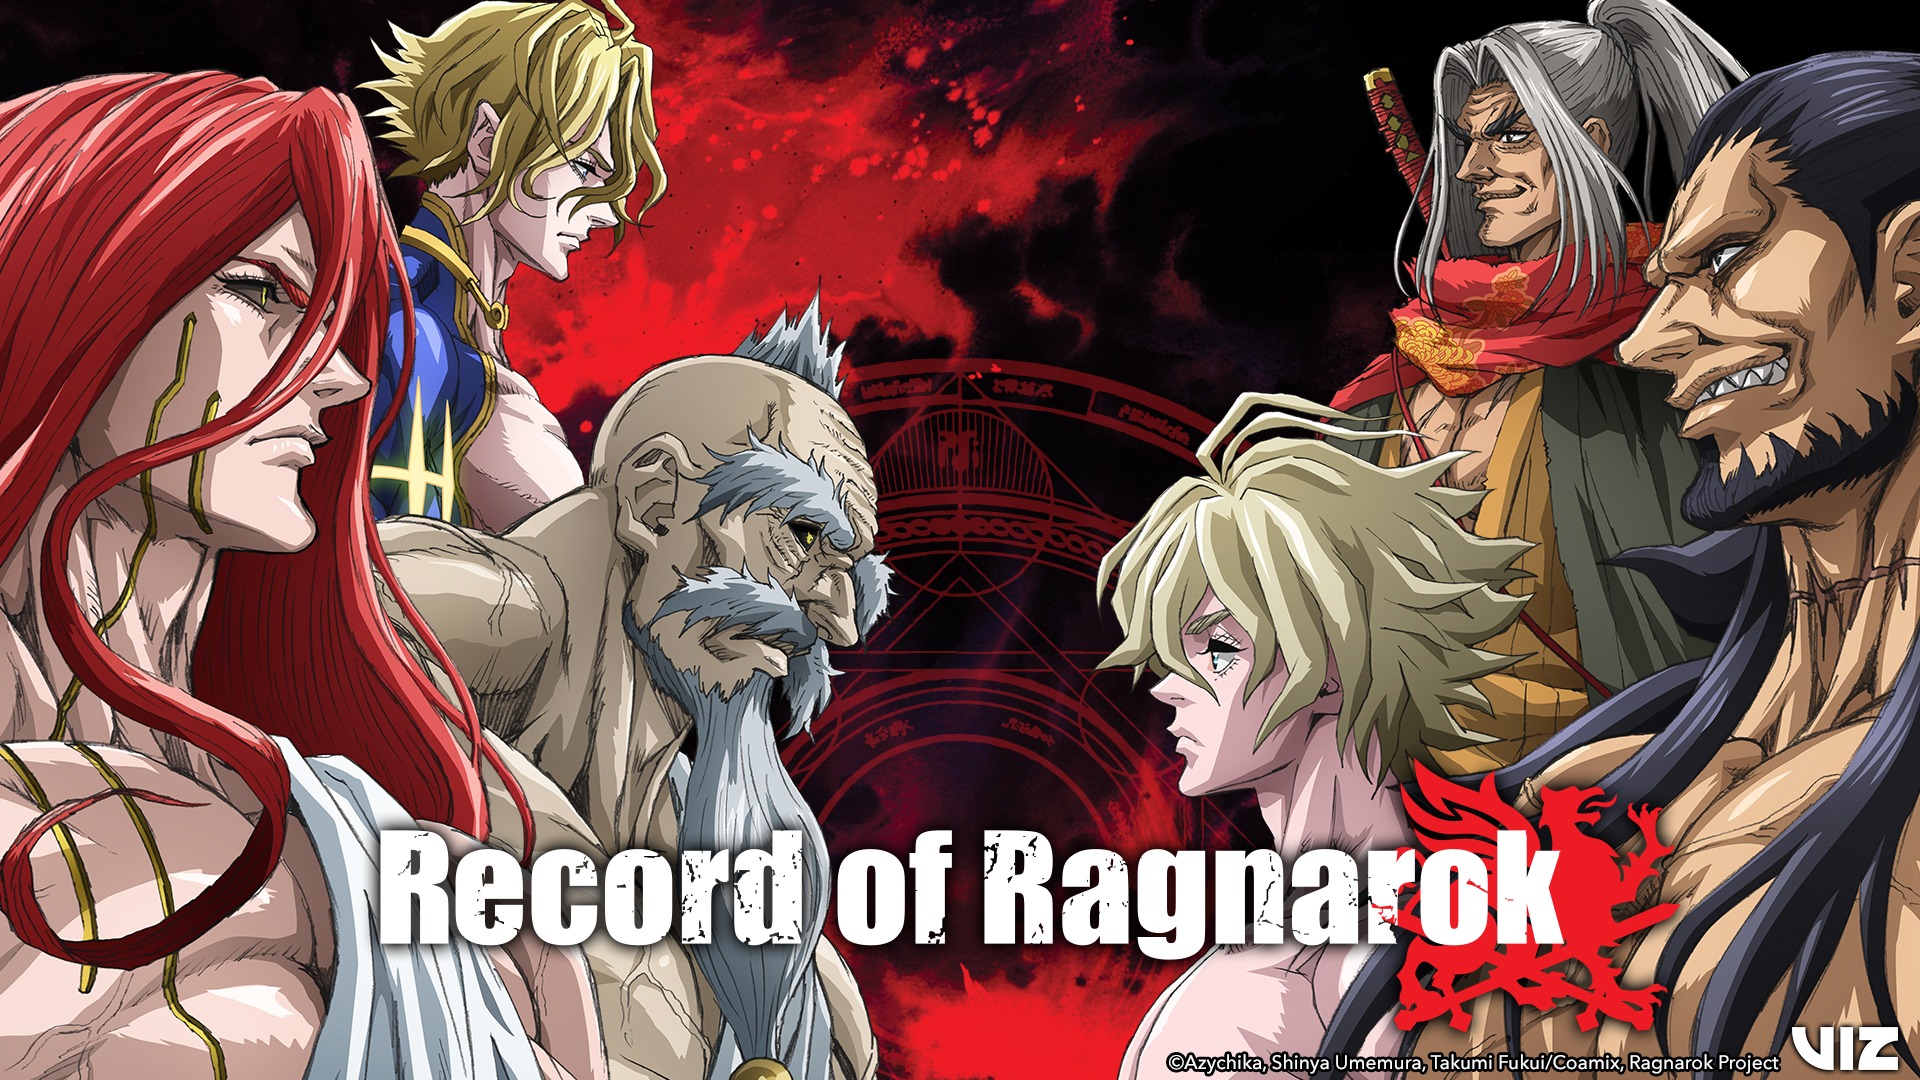 Record of Ragnarok Brings Epic Anime Battles to Home Video